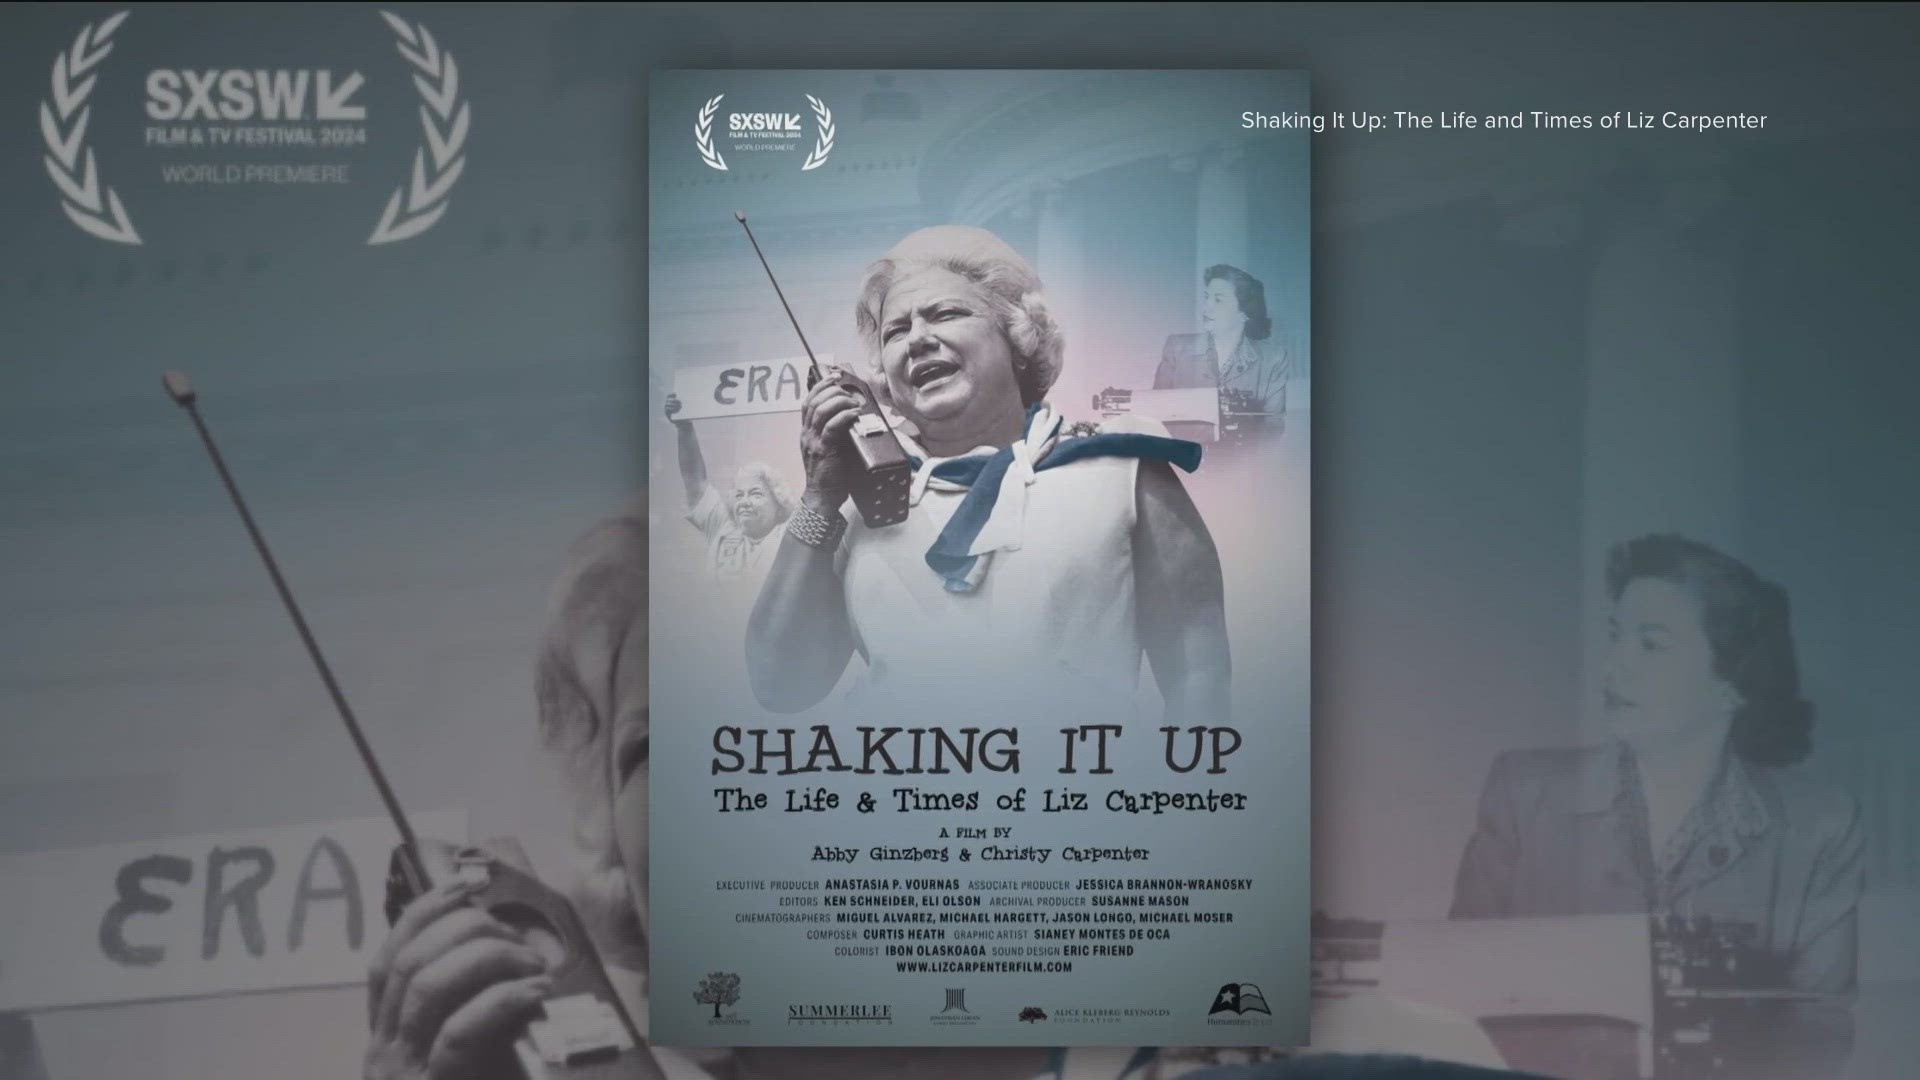 "Shaking It Up: The Life and Times of Liz Carpenter" premieres at SXSW this week. It focuses on the life of a famed Texas journalist and feminist.